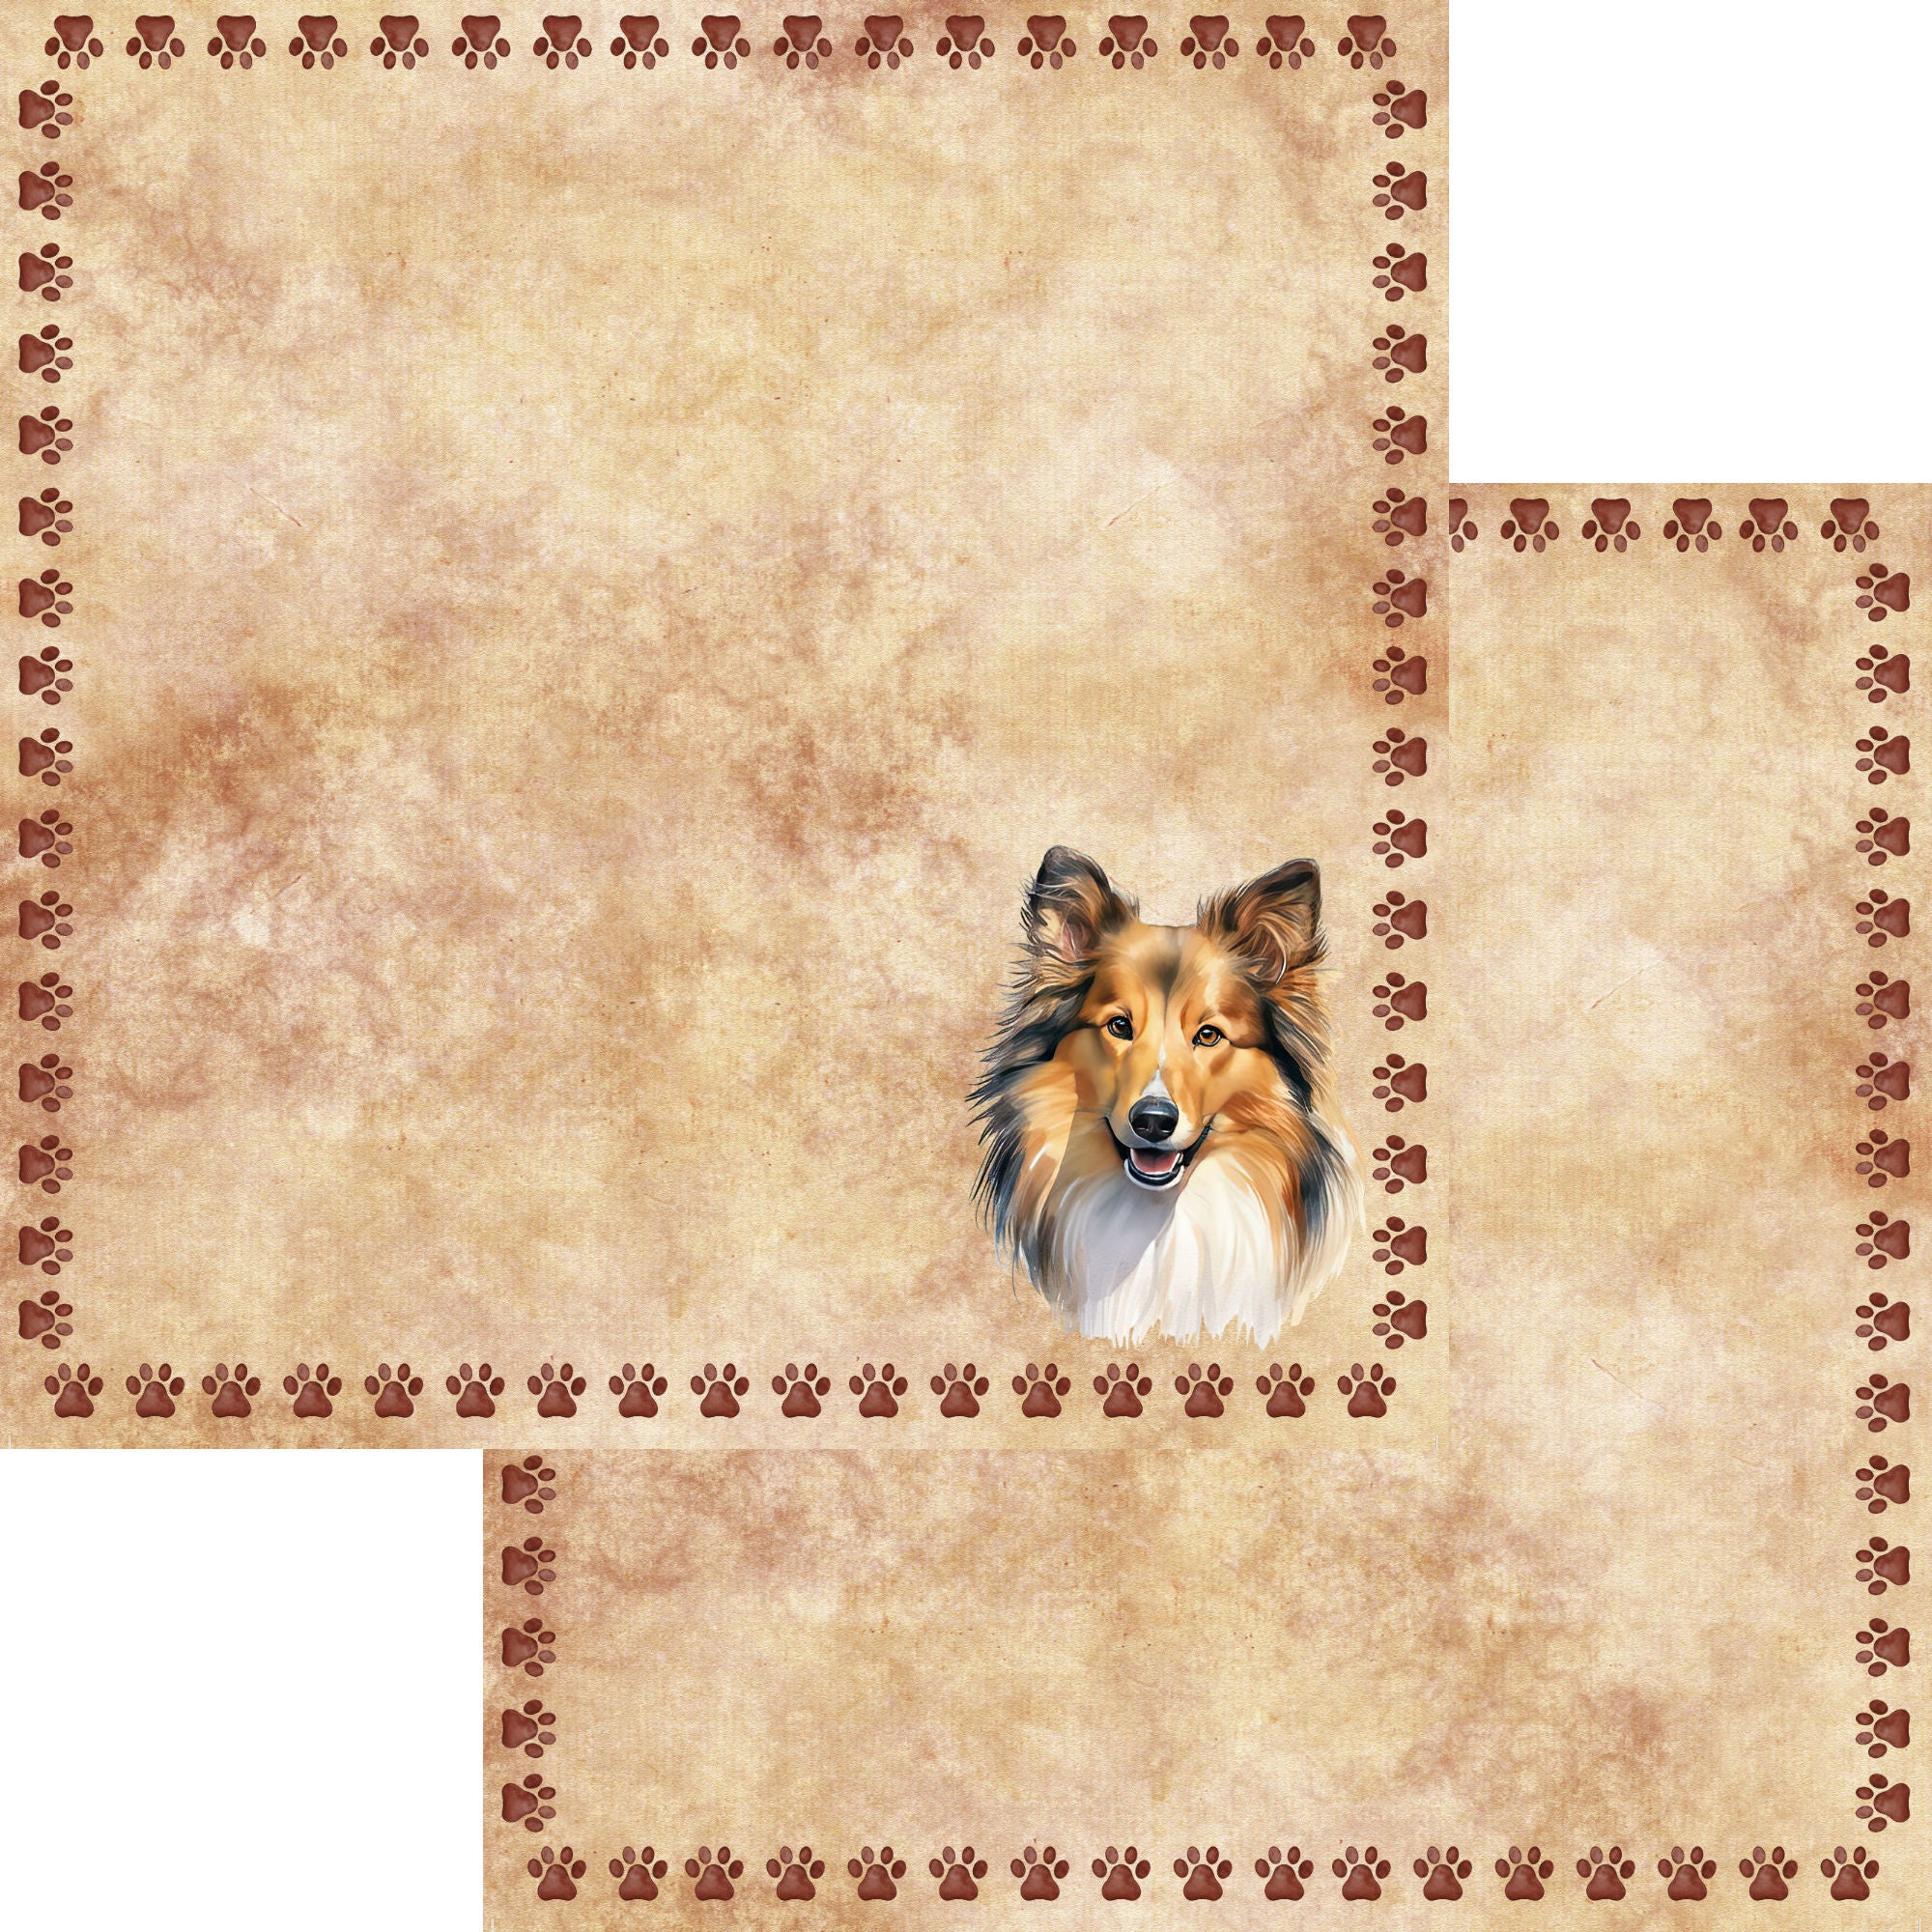 Dog Breeds Collection Sheltie 12 x 12 Double-Sided Scrapbook Paper by SSC Designs